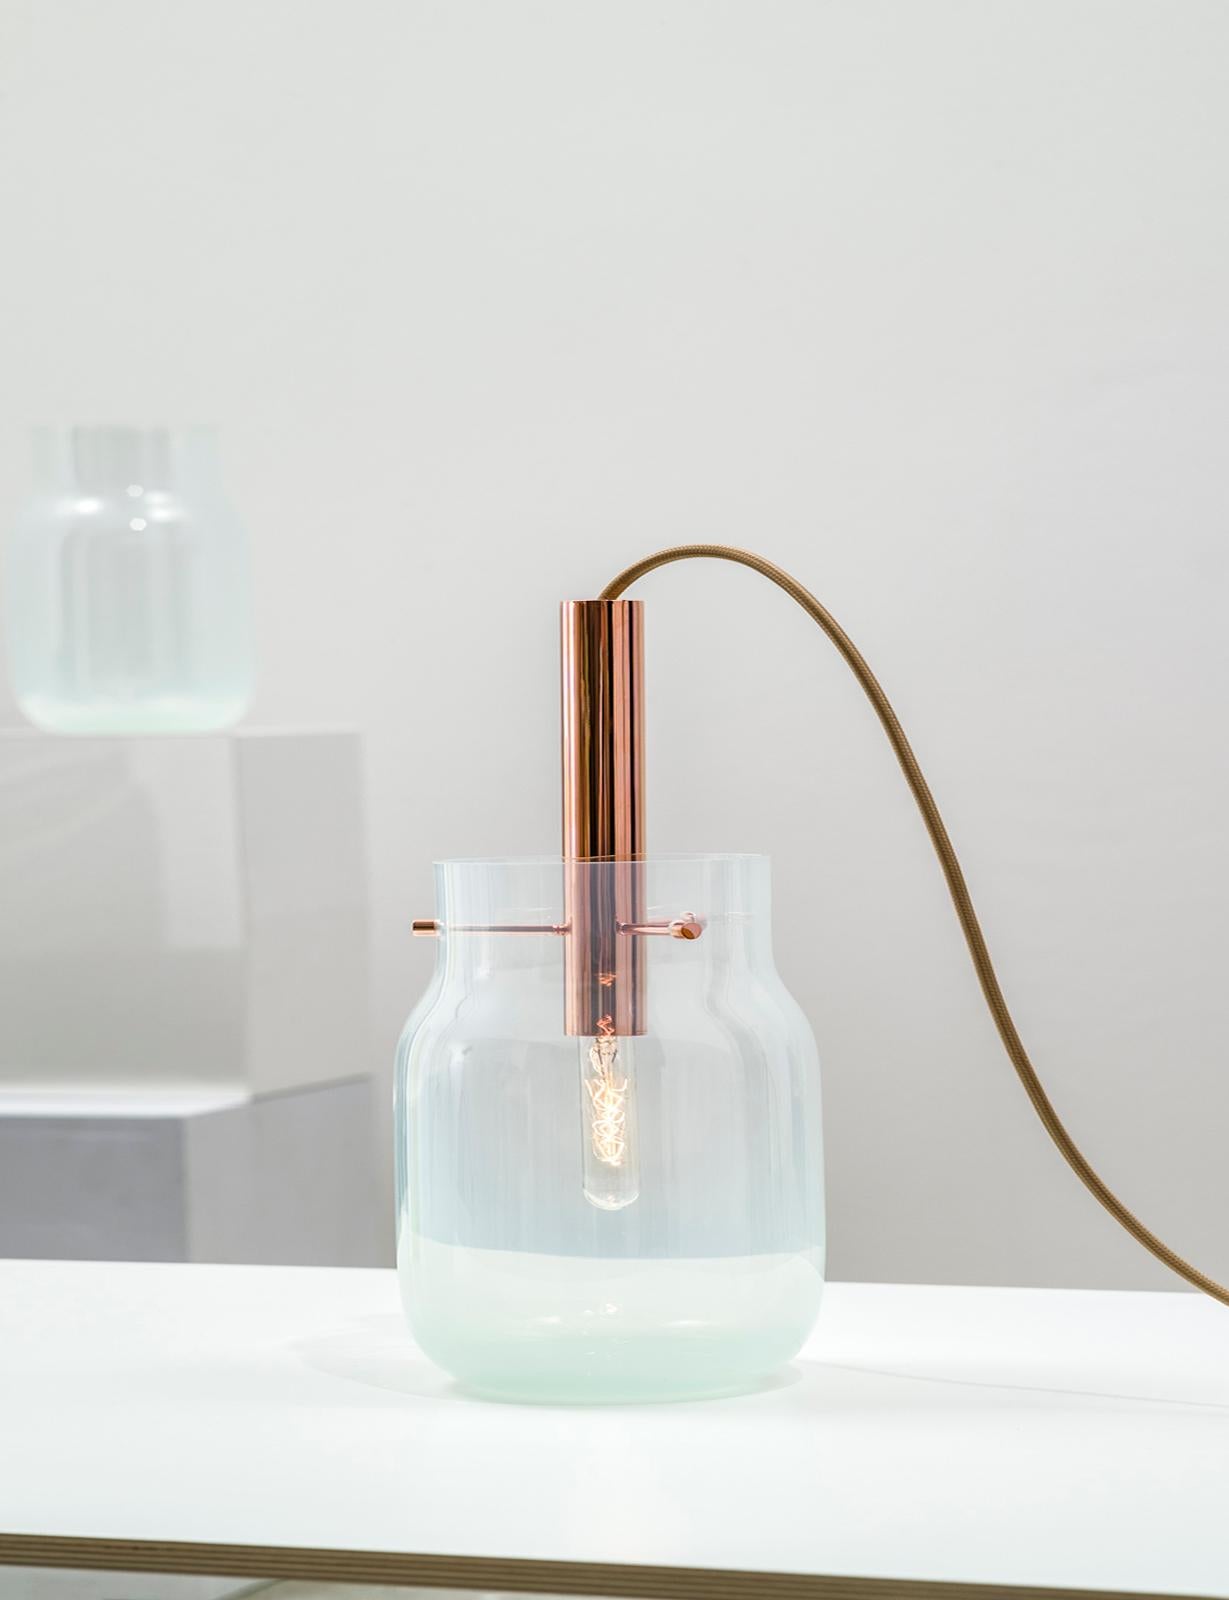 Bandaska table light by Dechem Studio
Dimensions: D 18 x H 24 cm
Materials: brass, glass.
Also available: different colours and sizes available
hand blown into beechwood moulds, Bandaska Lights is based on the highly popular Bandaska Vase